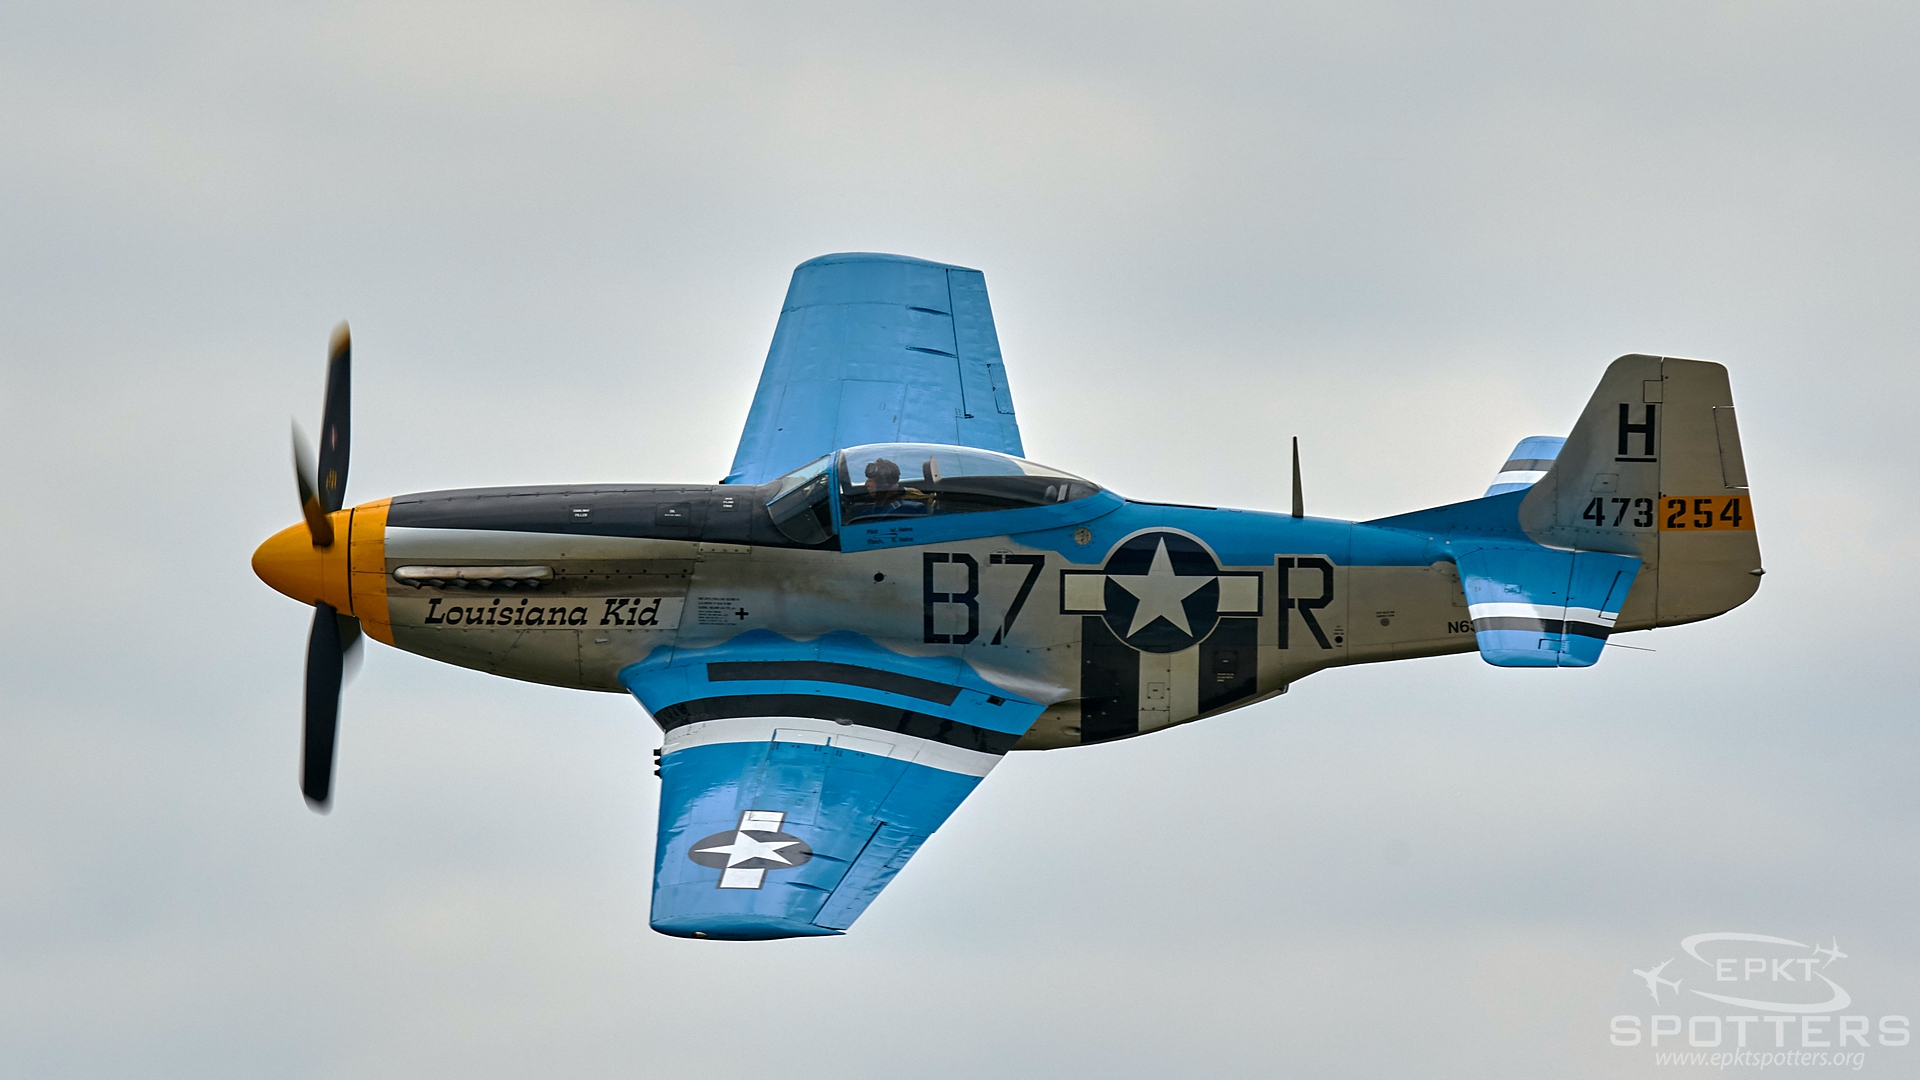 N6328T - North American P-51 D Mustang (Private) / Muchowiec - Katowice Poland [EPKM/]